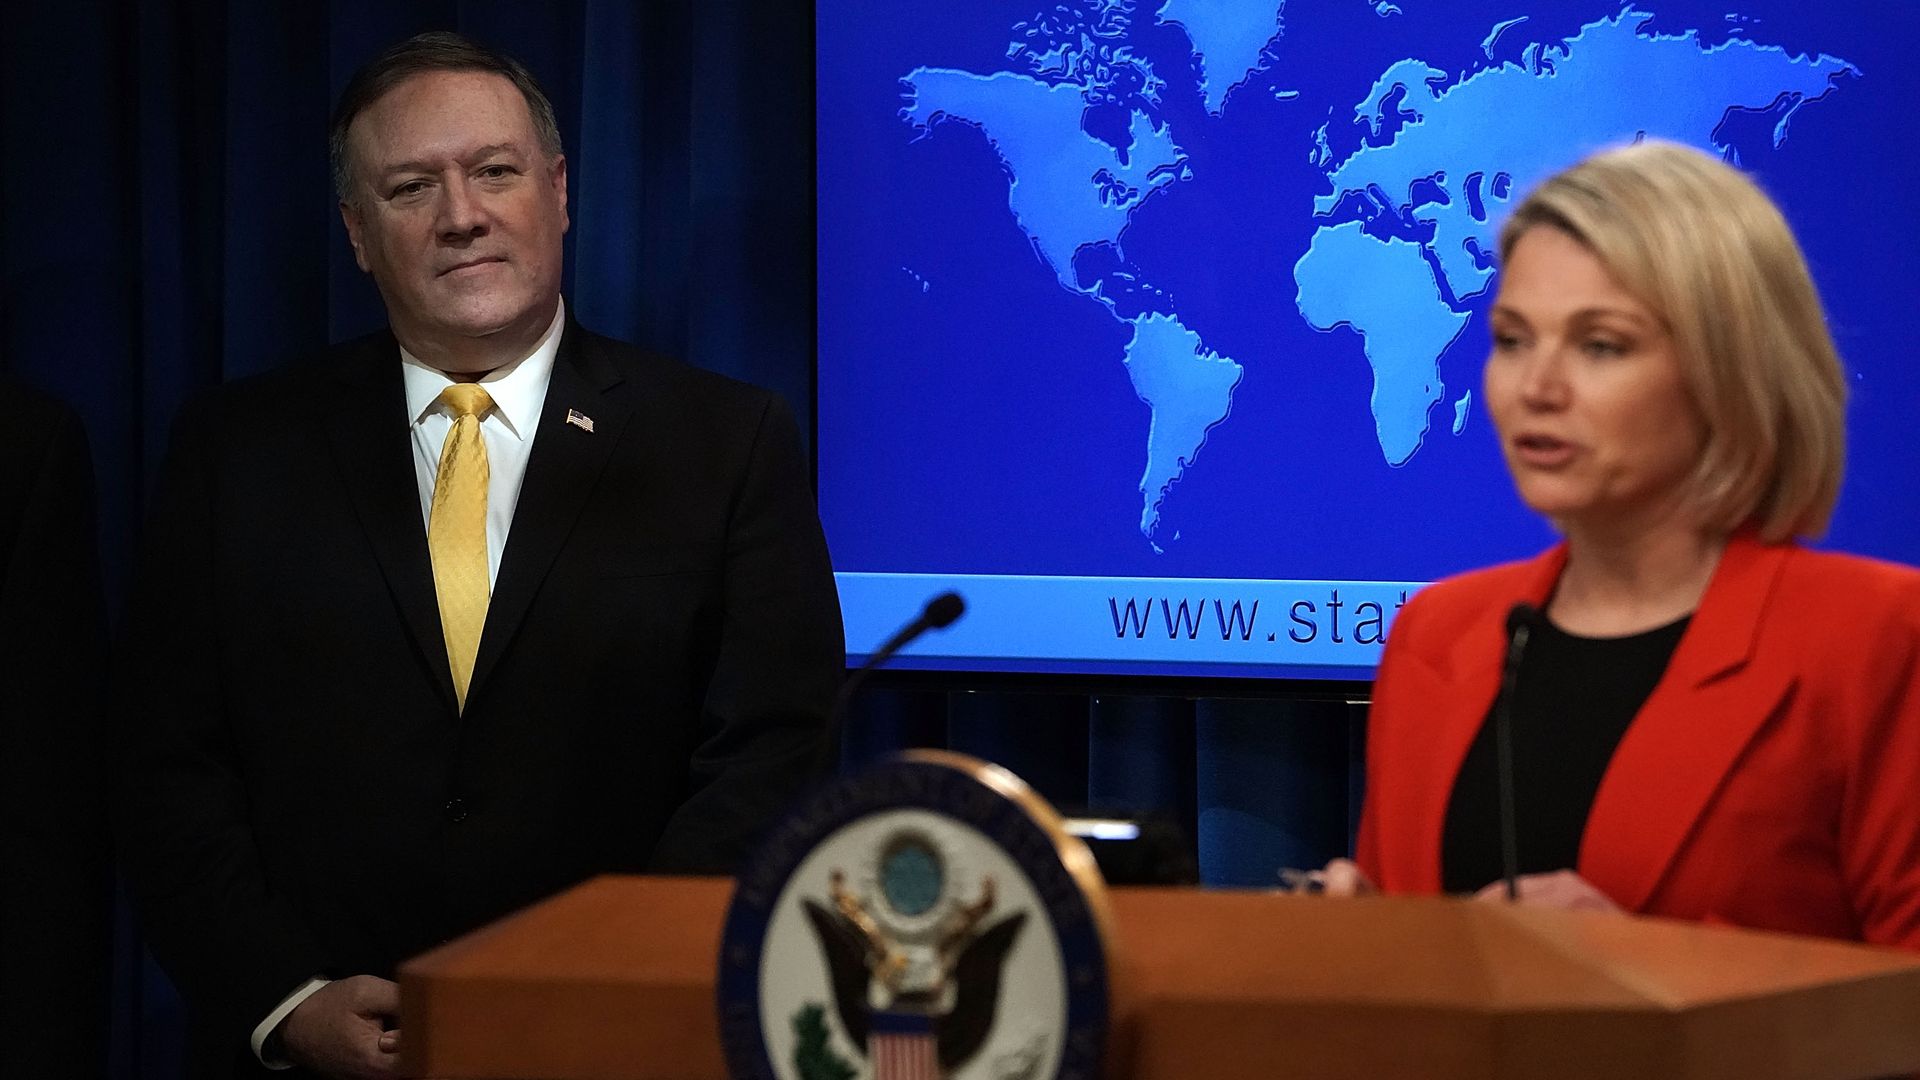 State Dept spokeswoman Heather Nauert speaks at a podium while Mike Pompeo watches from behind